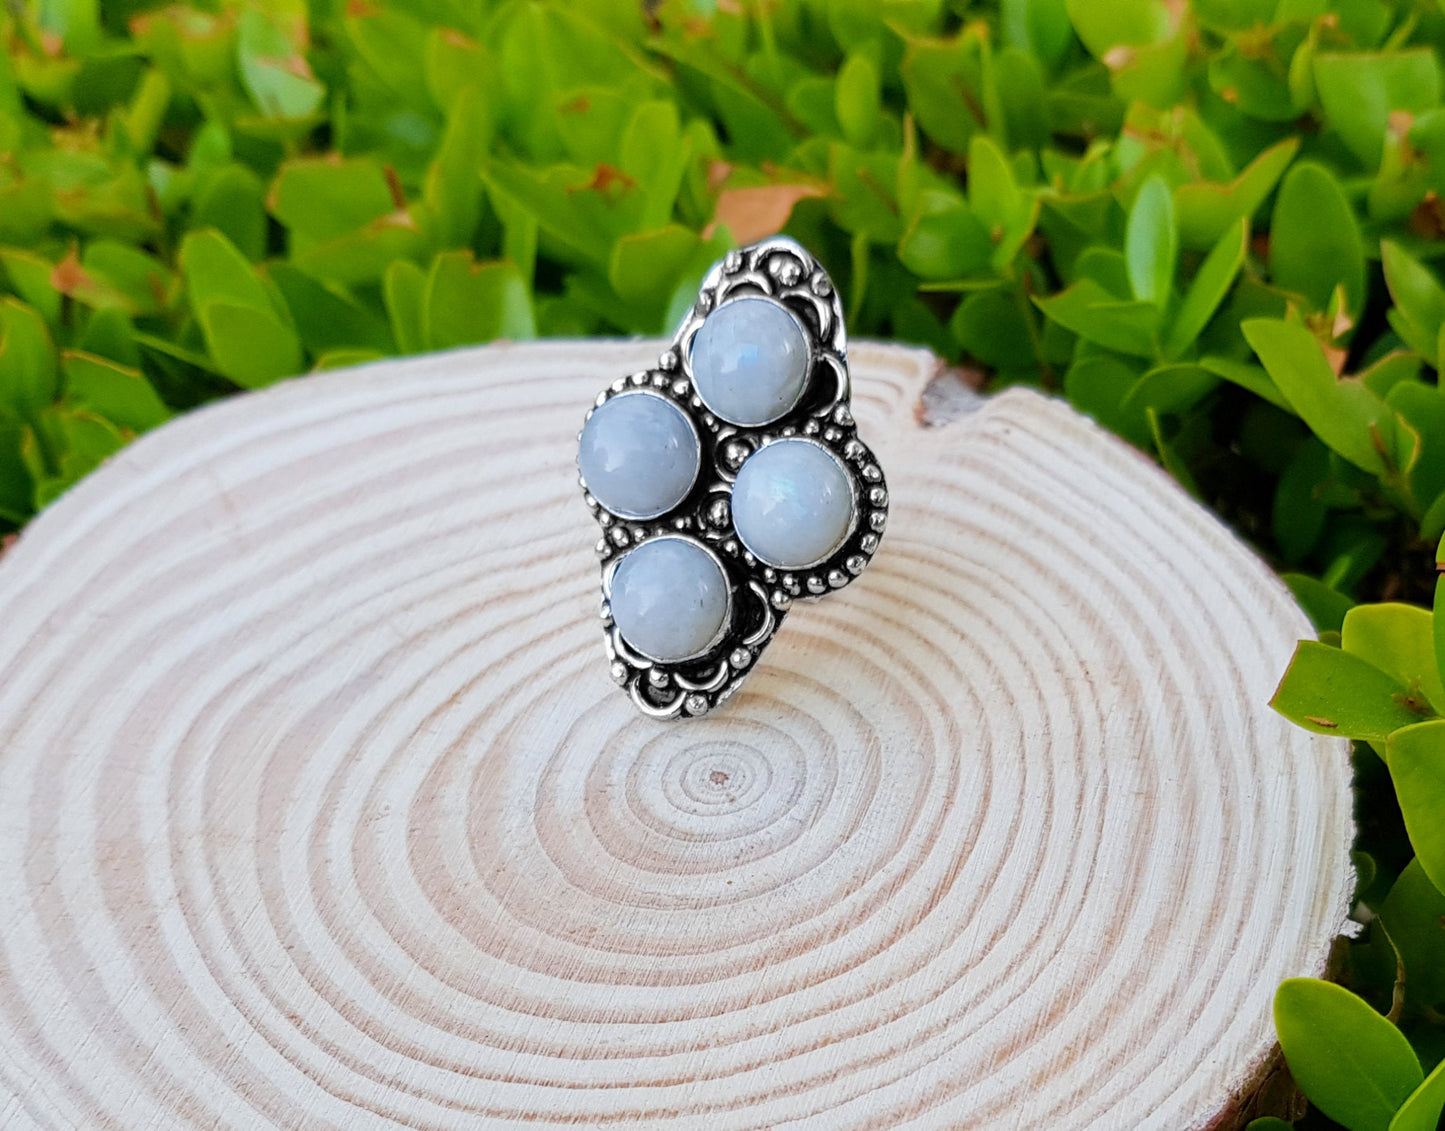 Moonstone Statement Ring In Sterling Silver Boho Ring Size US 7 GypsyJewelry Unique Gift Geometric Ring